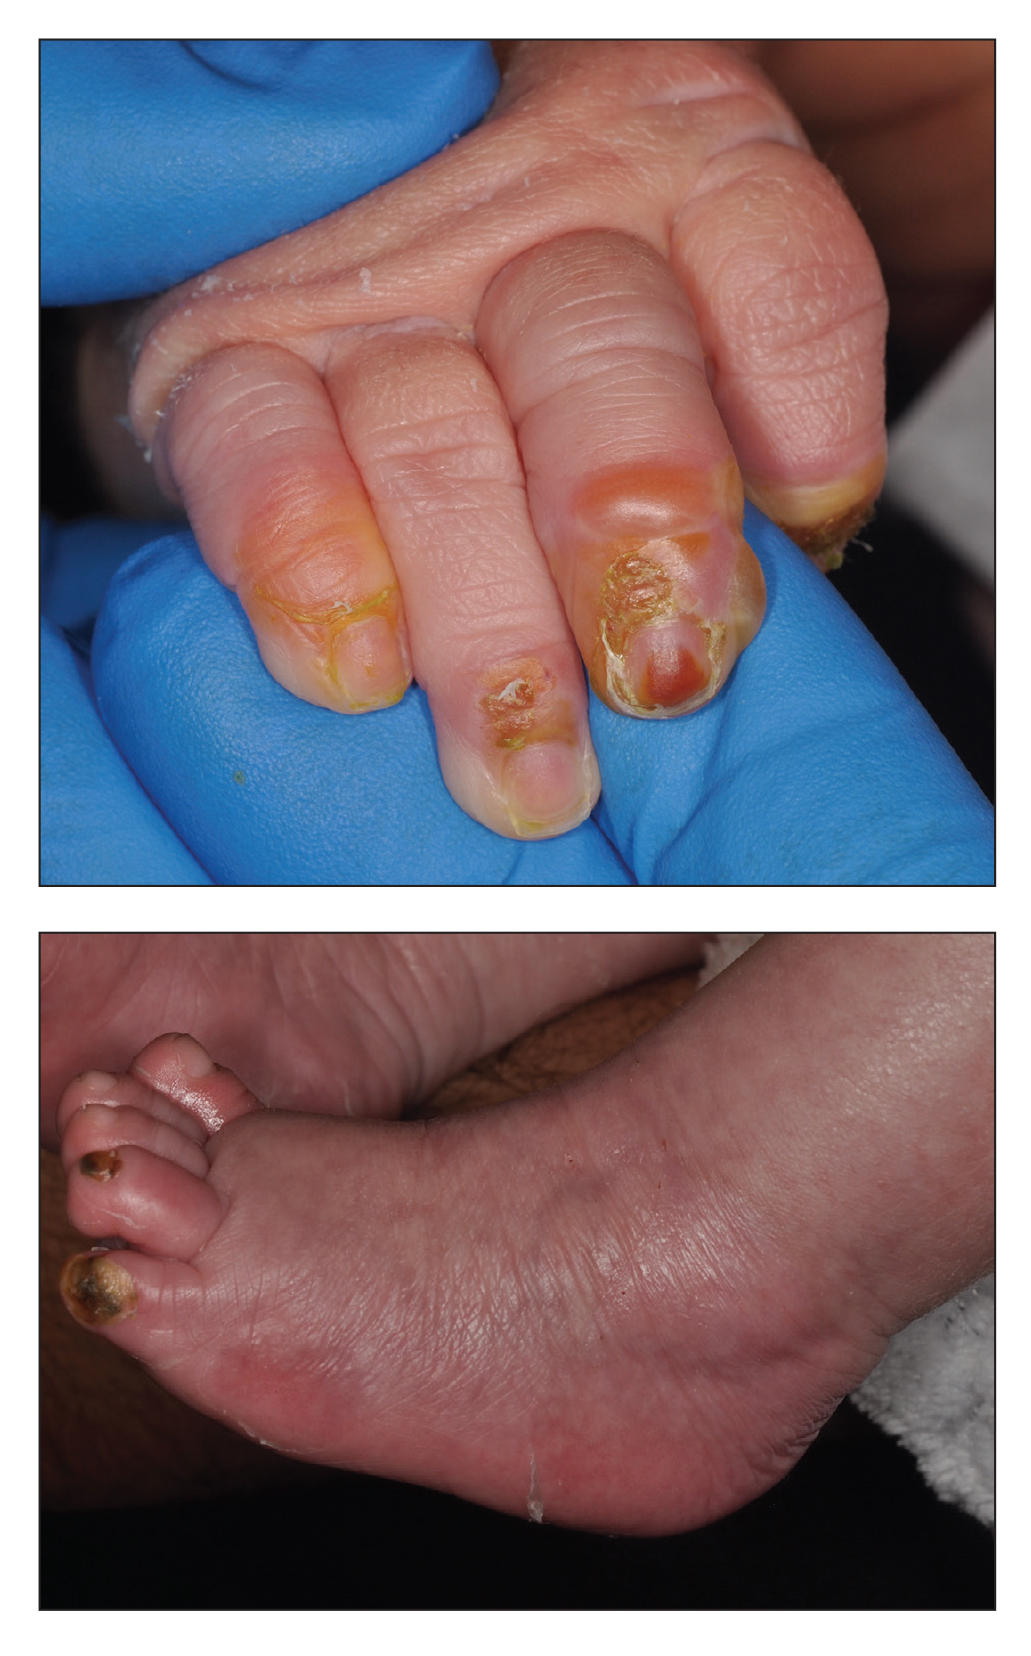 Blistering lesions in a newborn